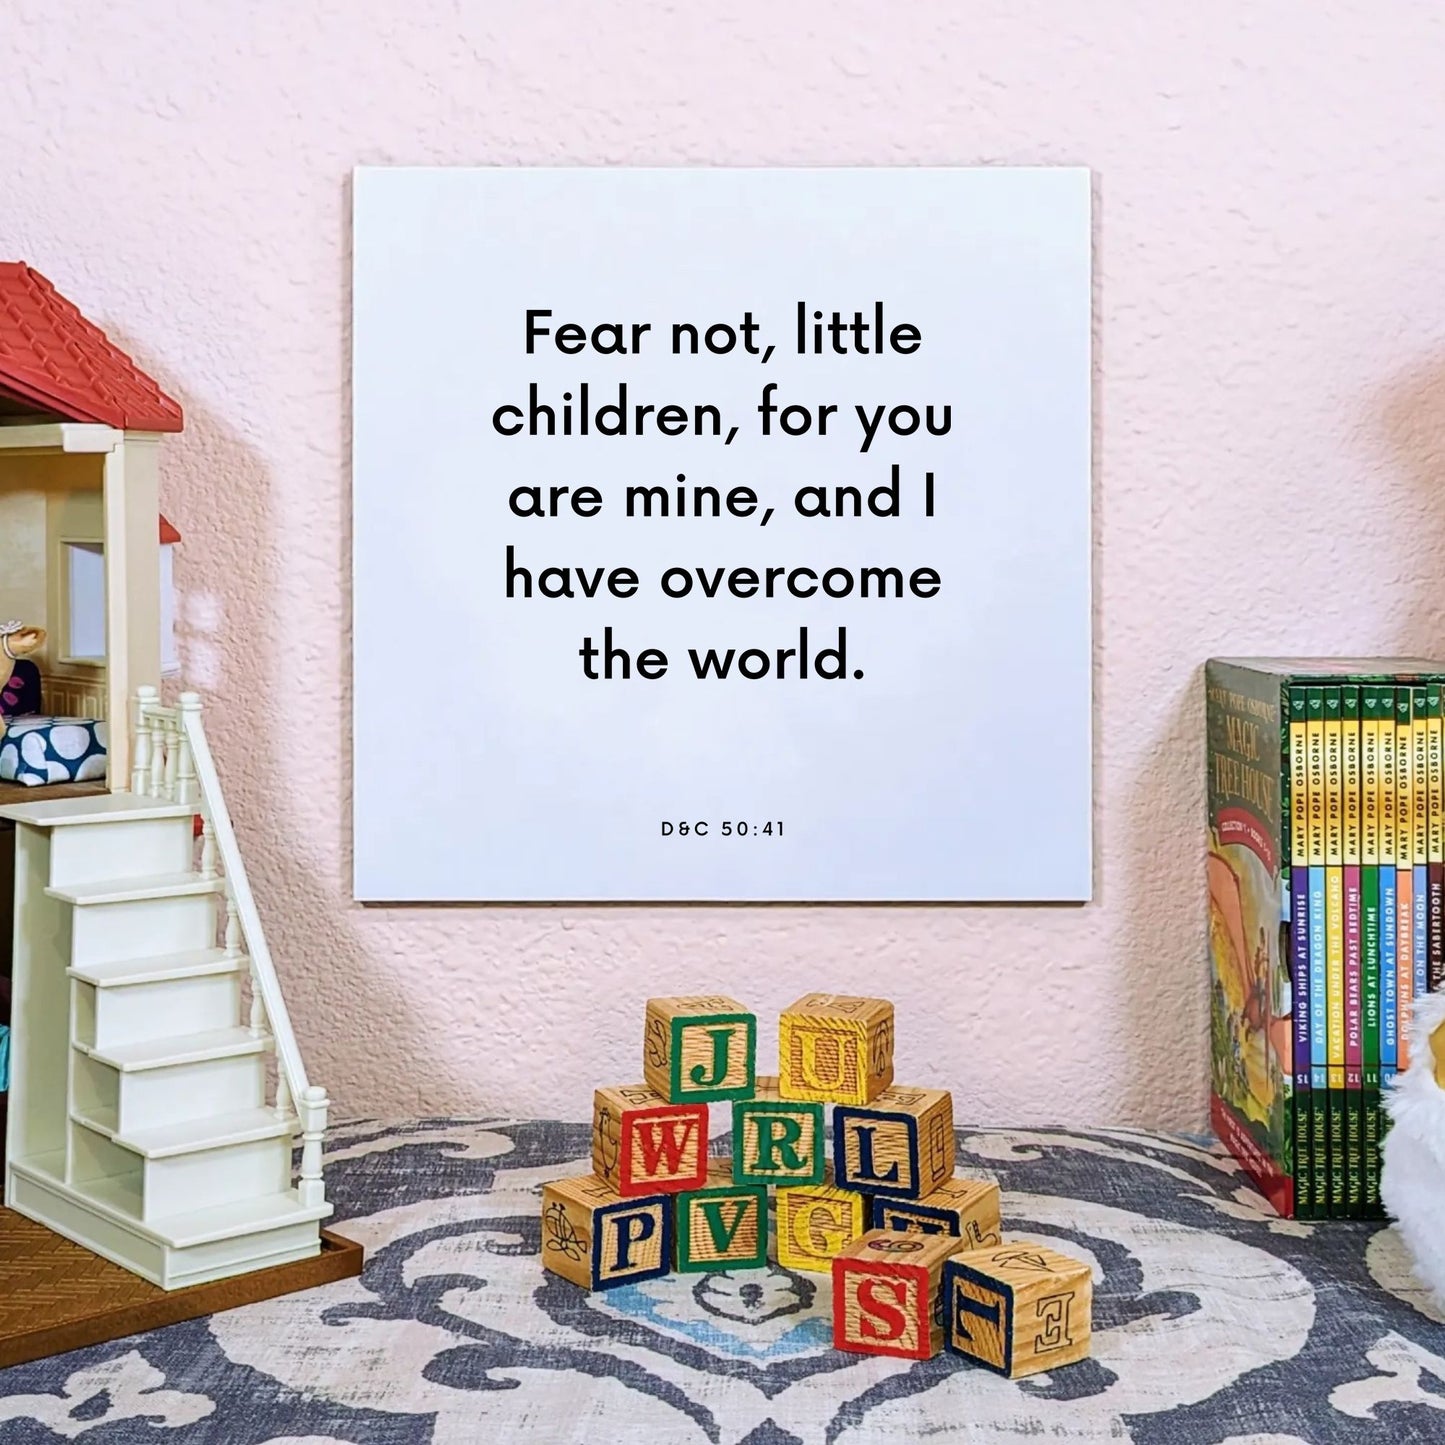 Playroom mouting of the scripture tile for D&C 50:41 - "Fear not, little children, for you are mine"